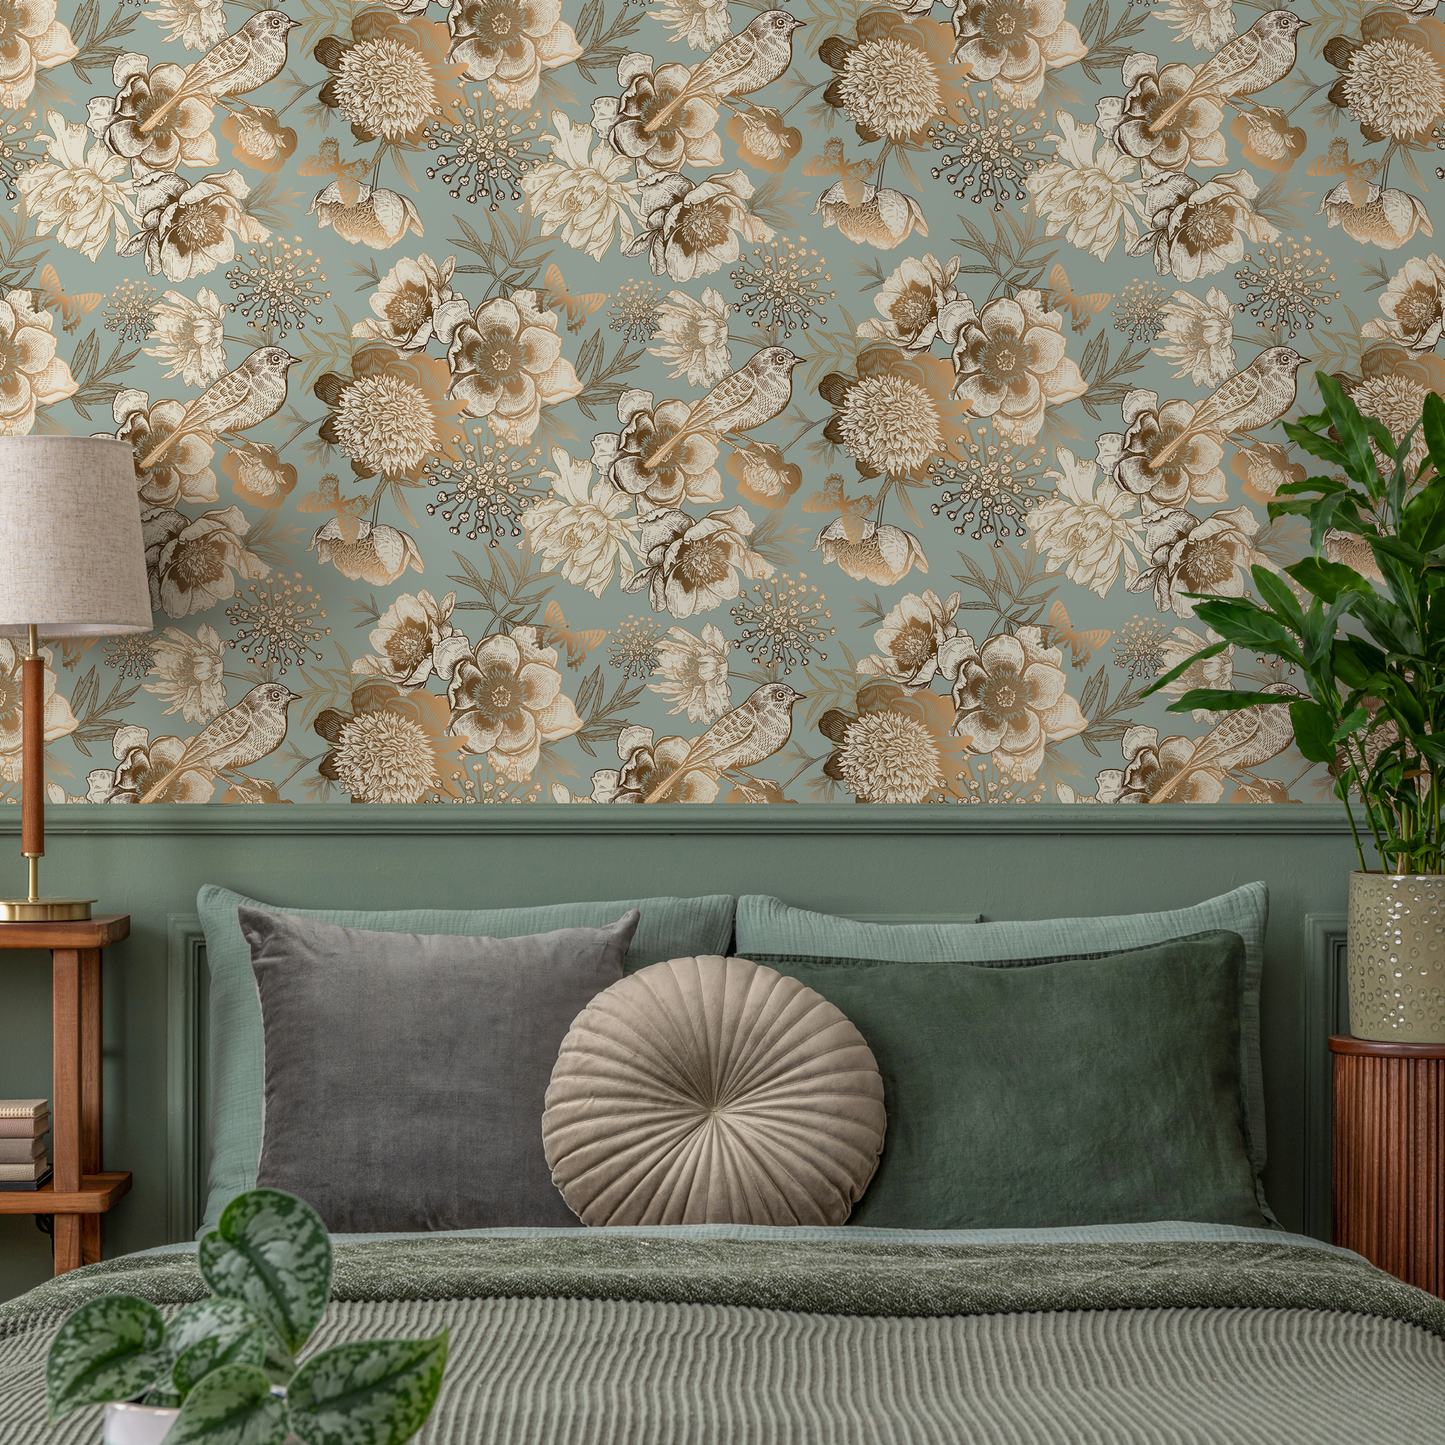 Removable Wallpaper Peel and Stick Wallpaper Wall Paper Wall Mural - Vintage Flower Mint and Non-Metalic Gold Color - A918